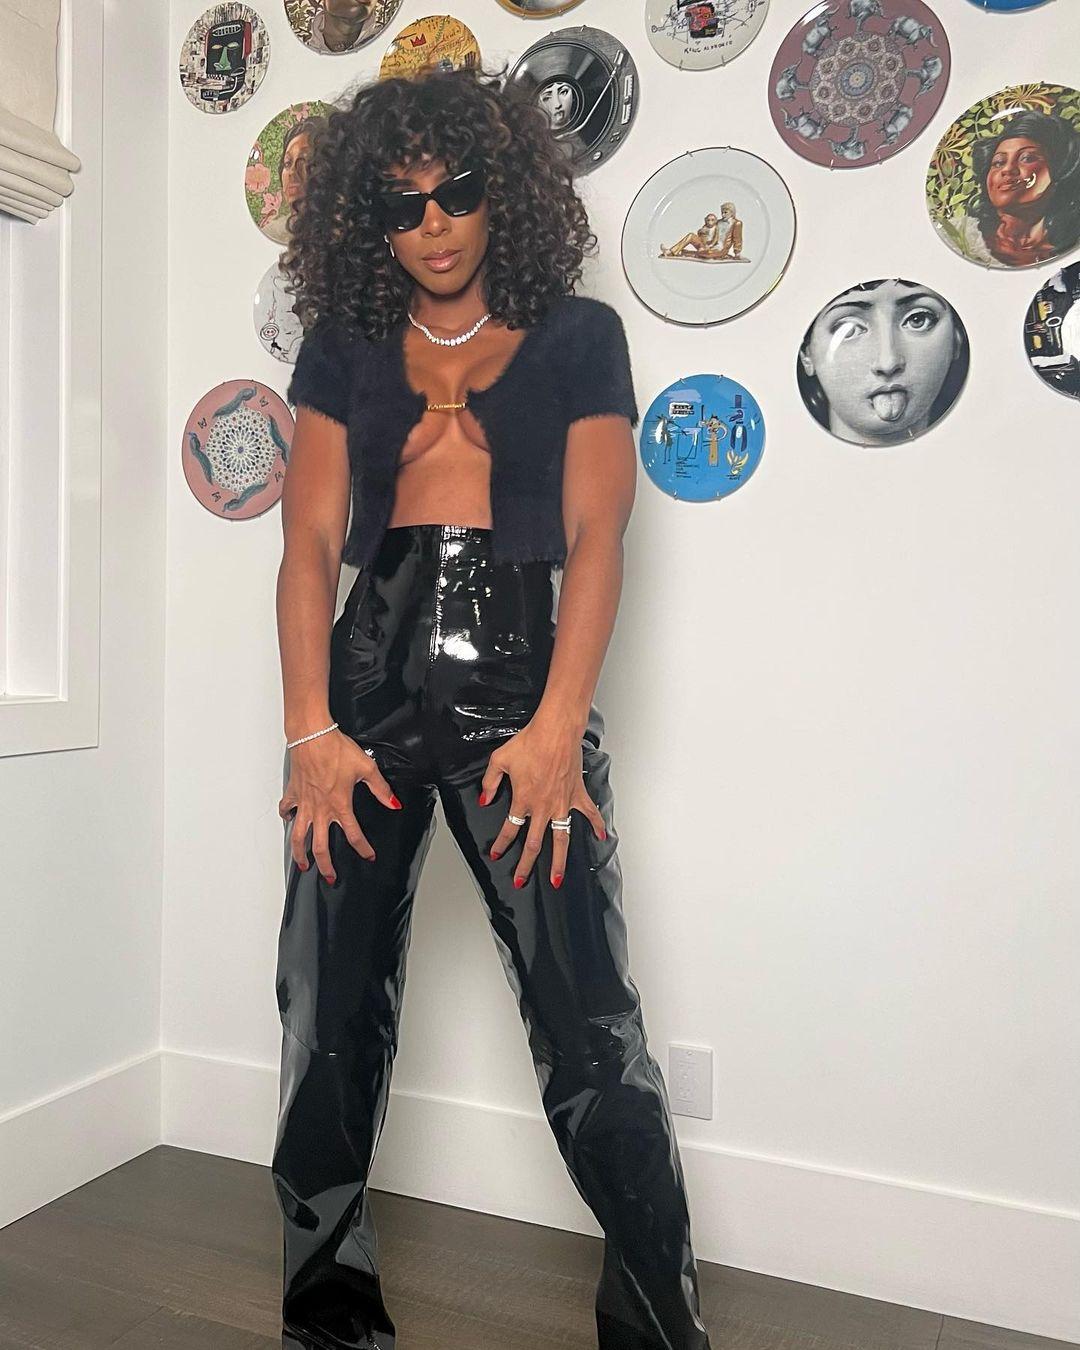 Kelly Rowland Is Popping Out Of Her Shirt In Daring Photos